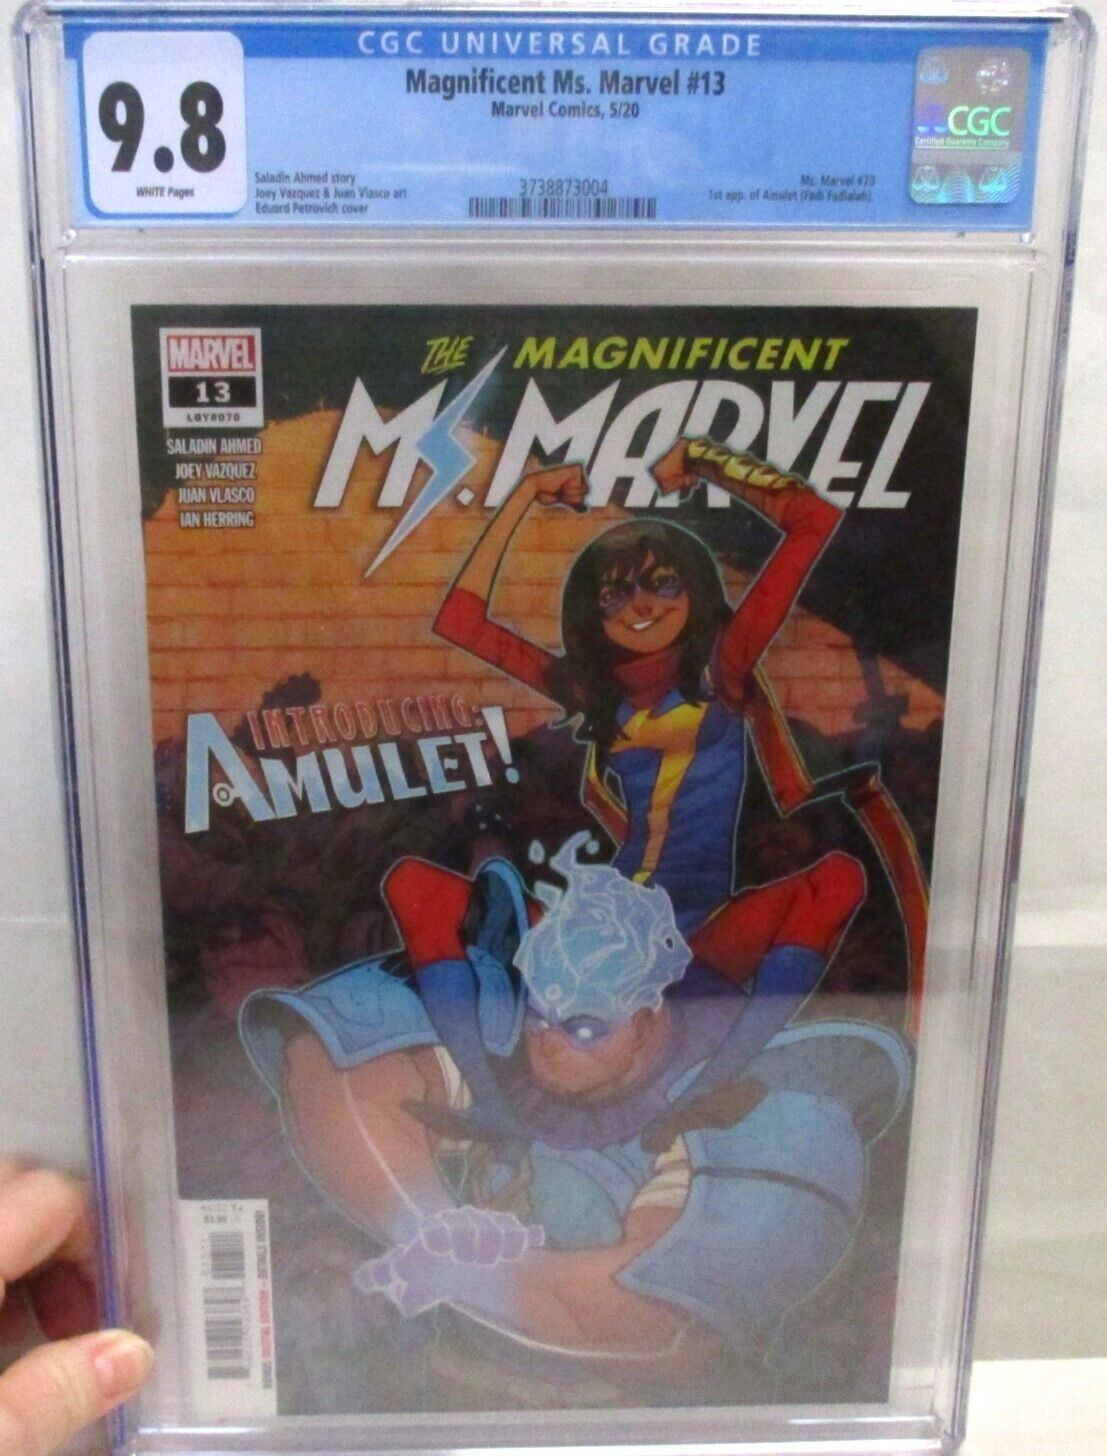 MAGNIFICENT MS. MARVEL #13 MARVEL 5/20 CGC 9.8 WHITE PAGES 1st APP AMULET